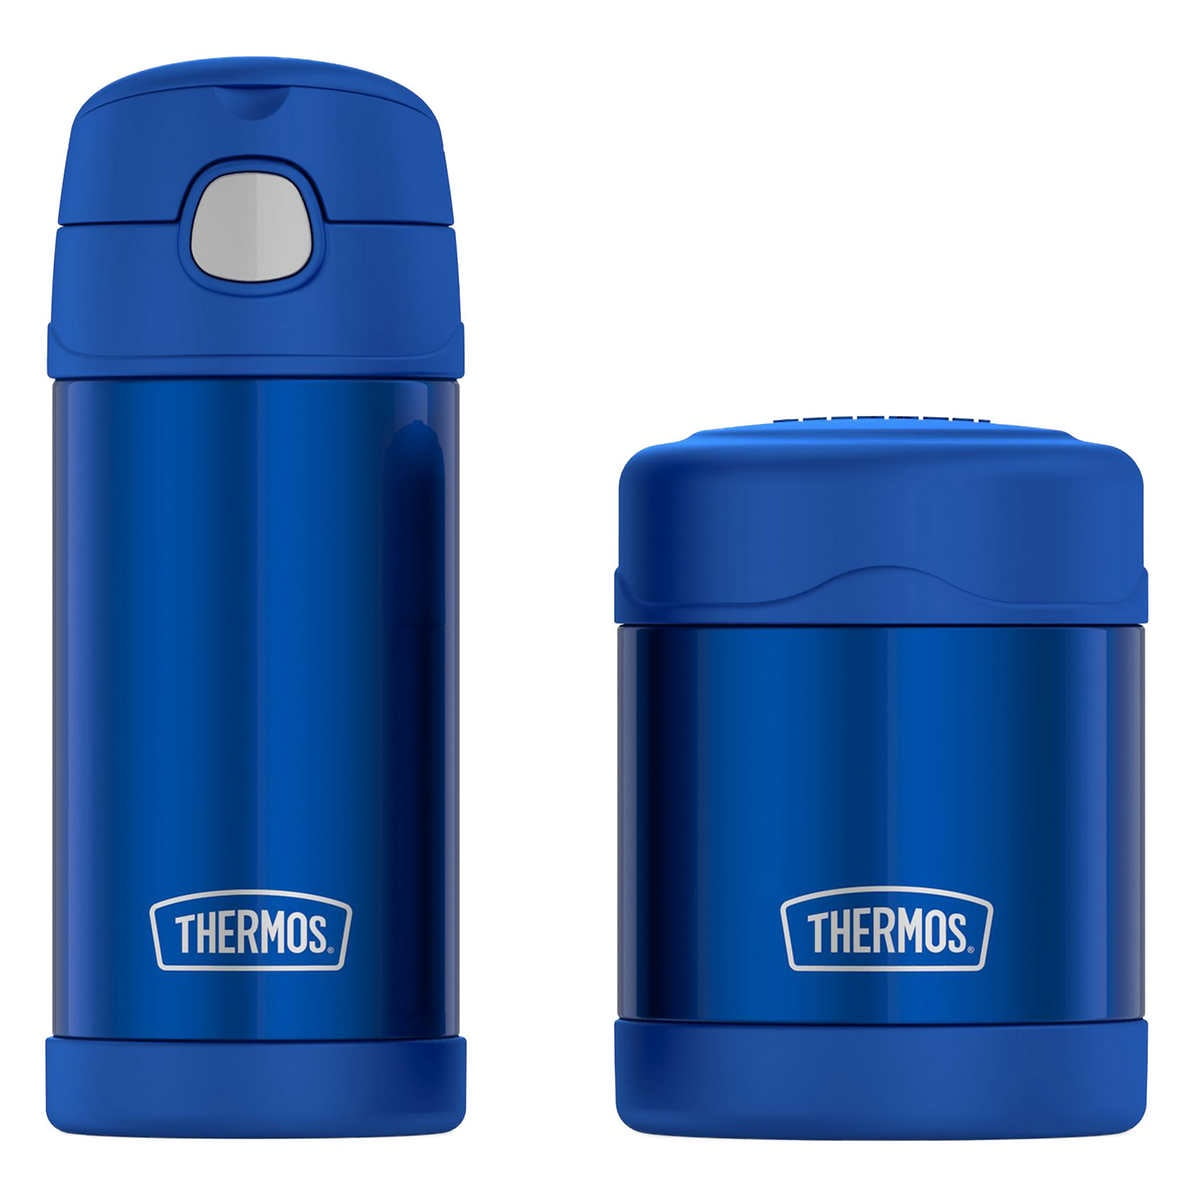 Thermos FUNtainer Food Jar Review: Affordable and Kid-Friendly